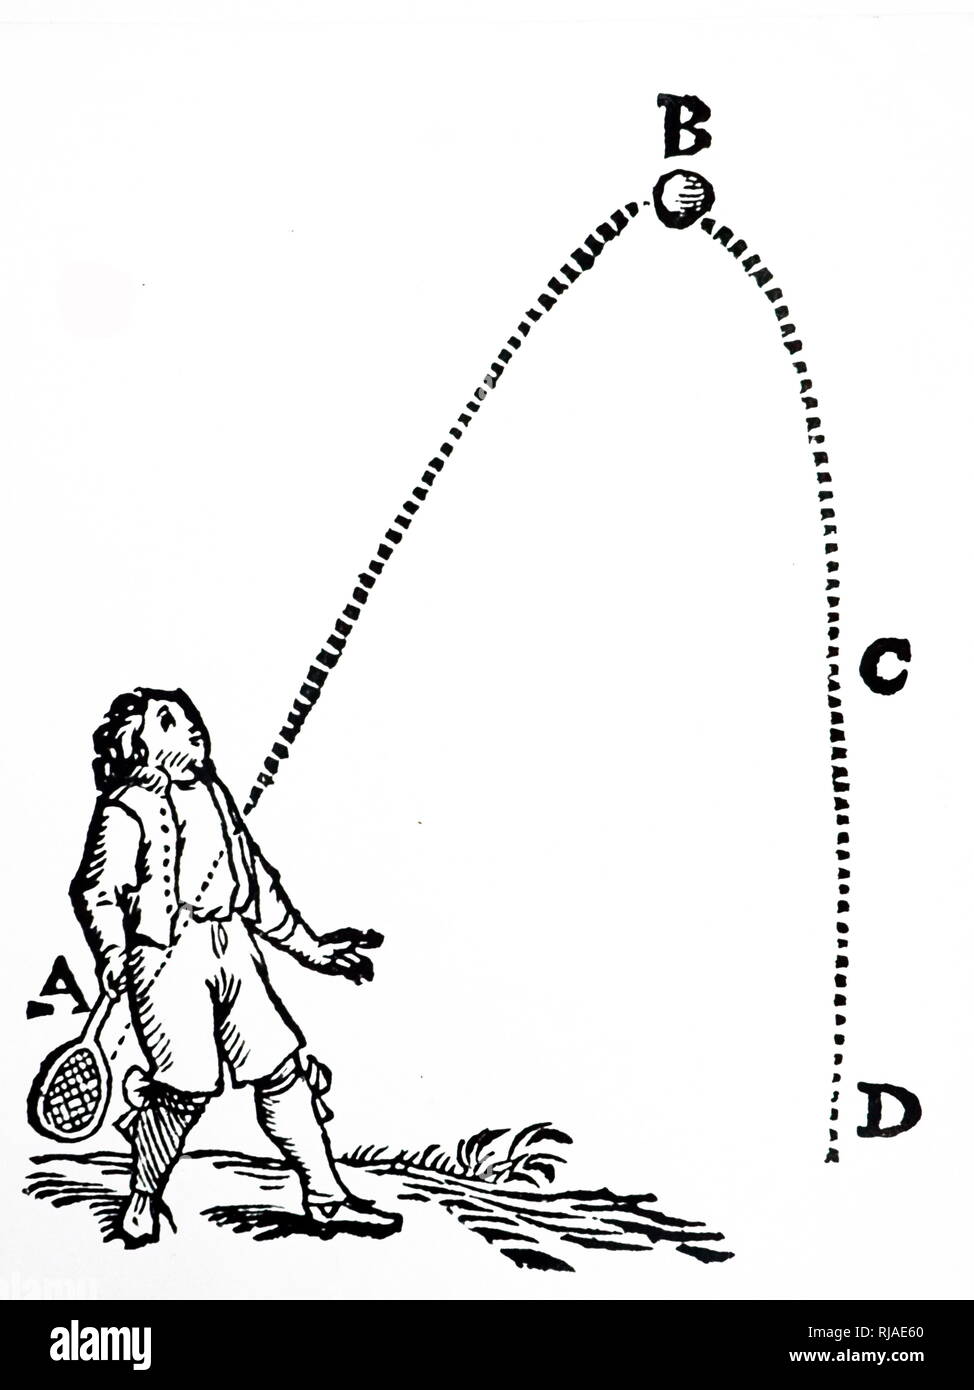 Illustration by Rene Descartes, showing the parabolic course of a projectile. From Epistolae; Amsterdam 1668 Stock Photo